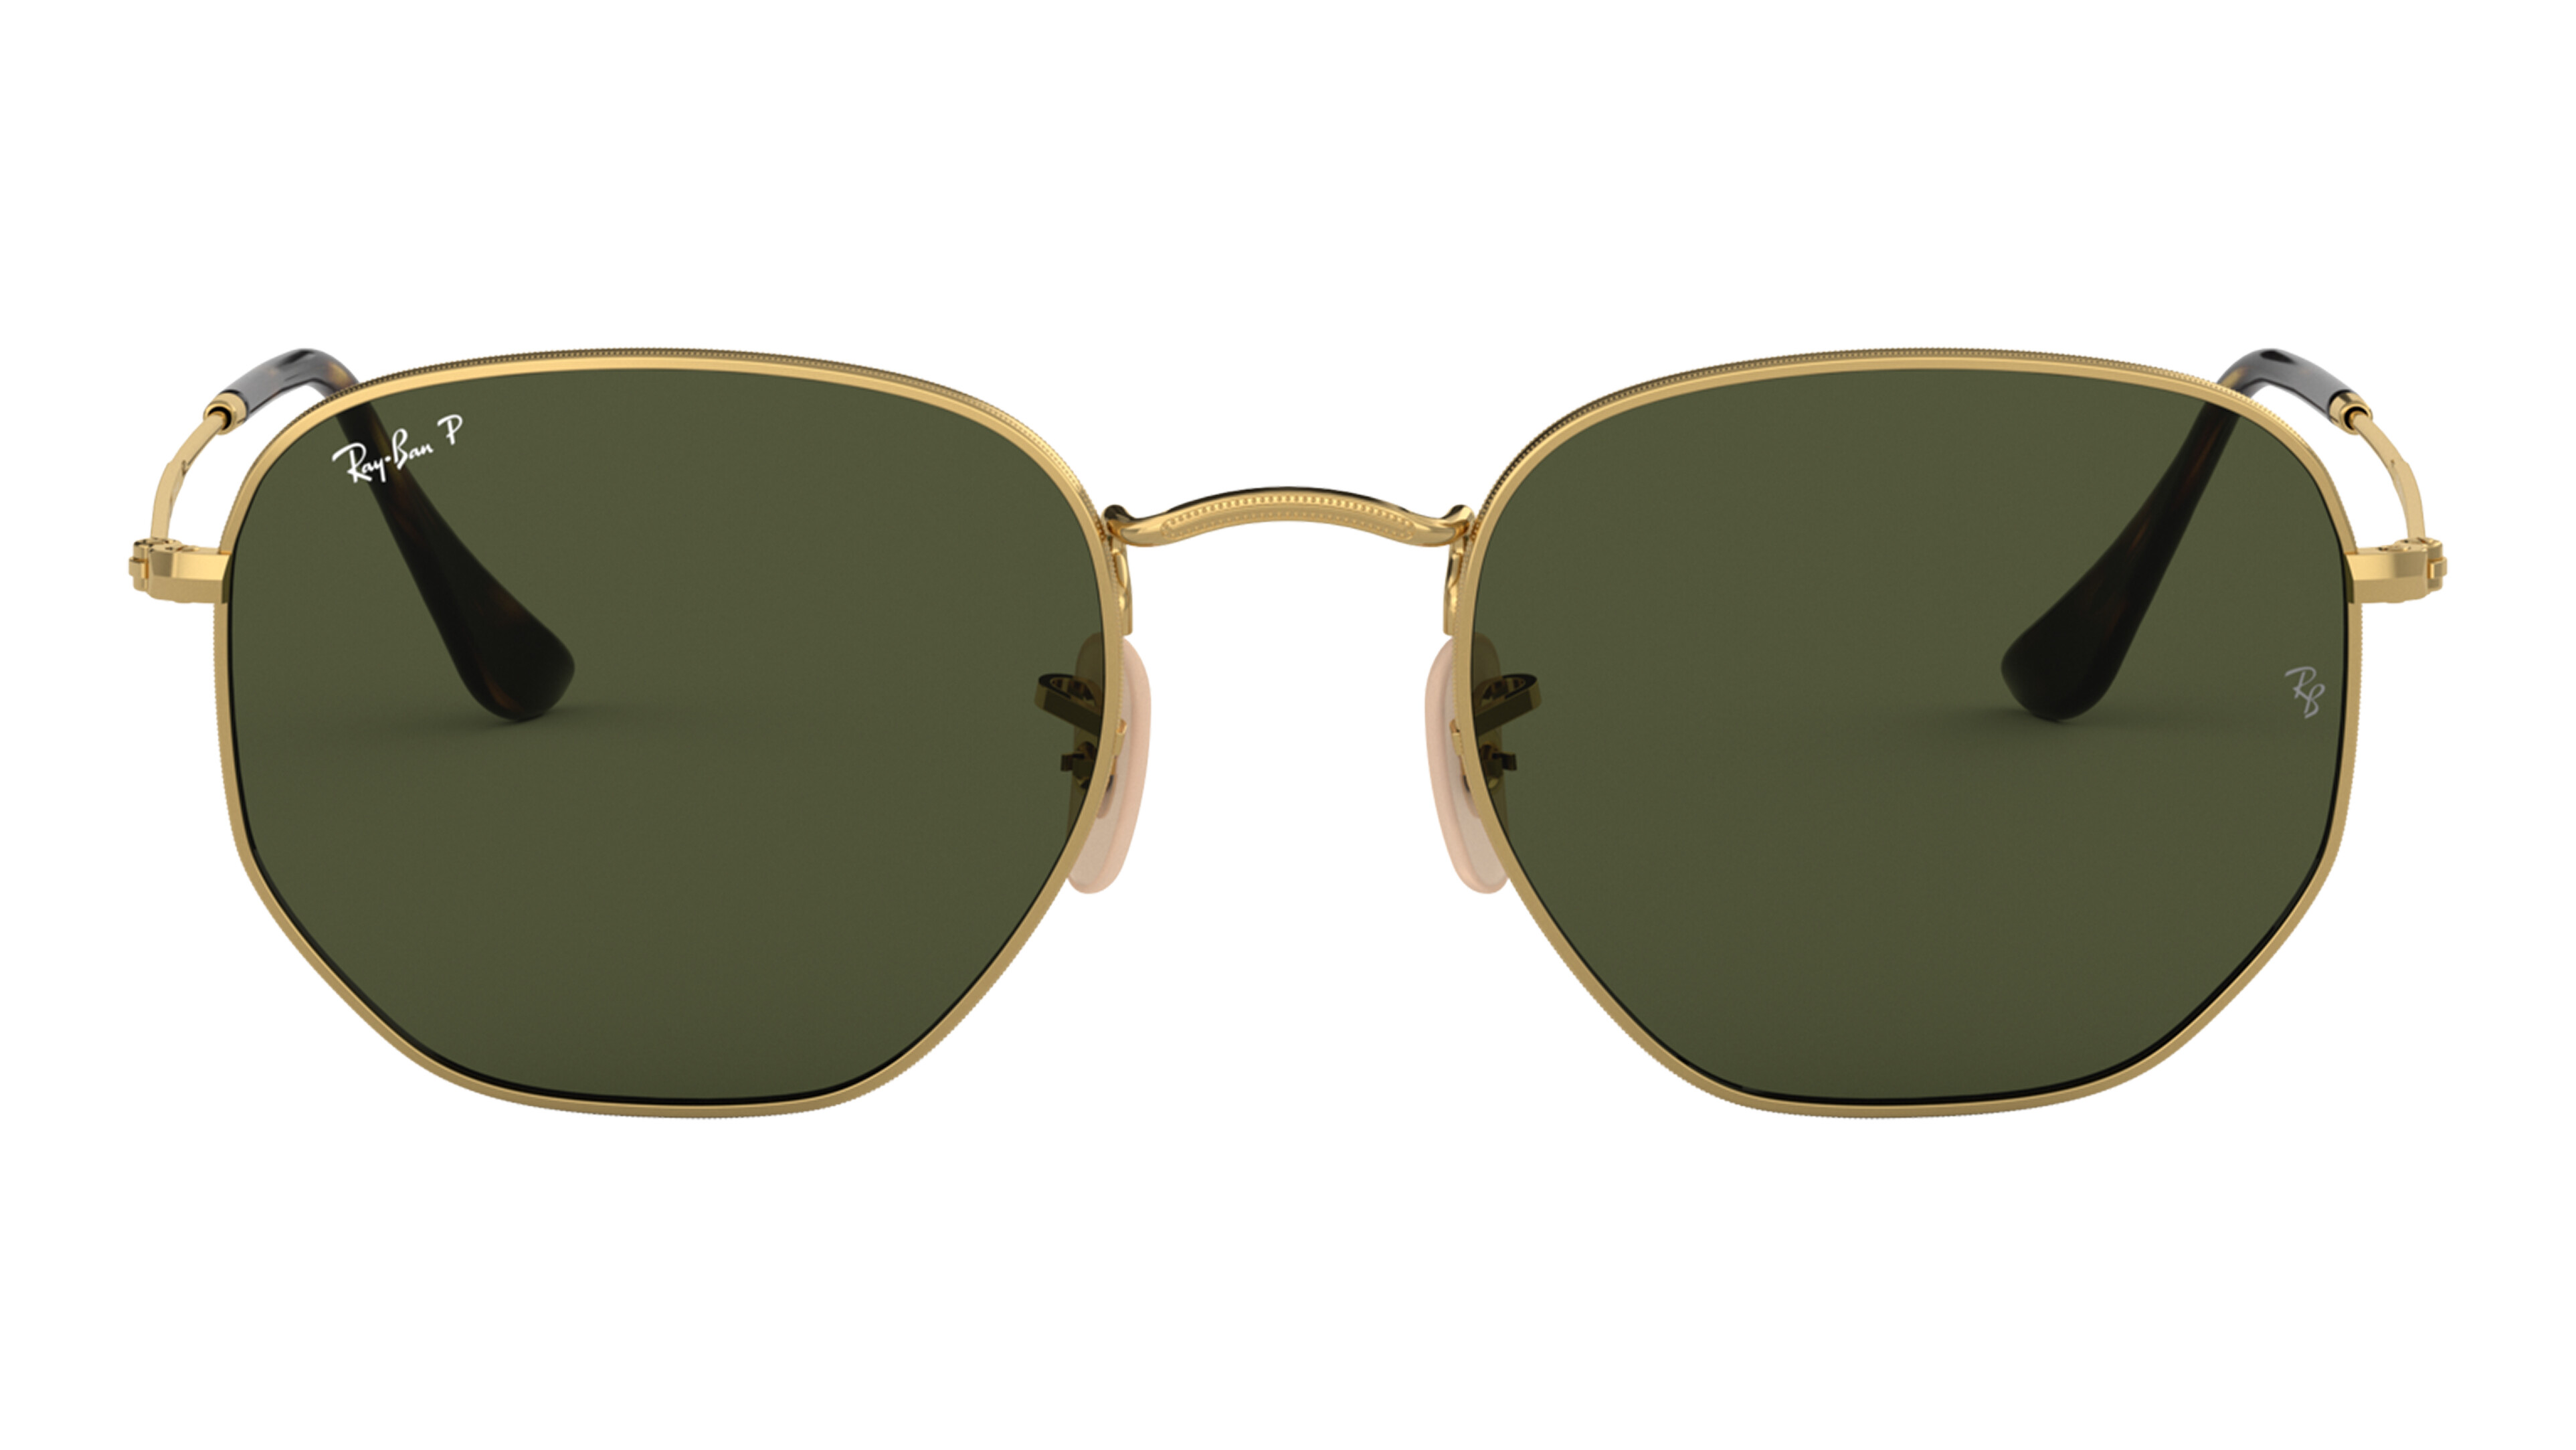 [products.image.front] Ray-Ban HEXAGONAL 0RB3548N 001/58 Sonnenbrille